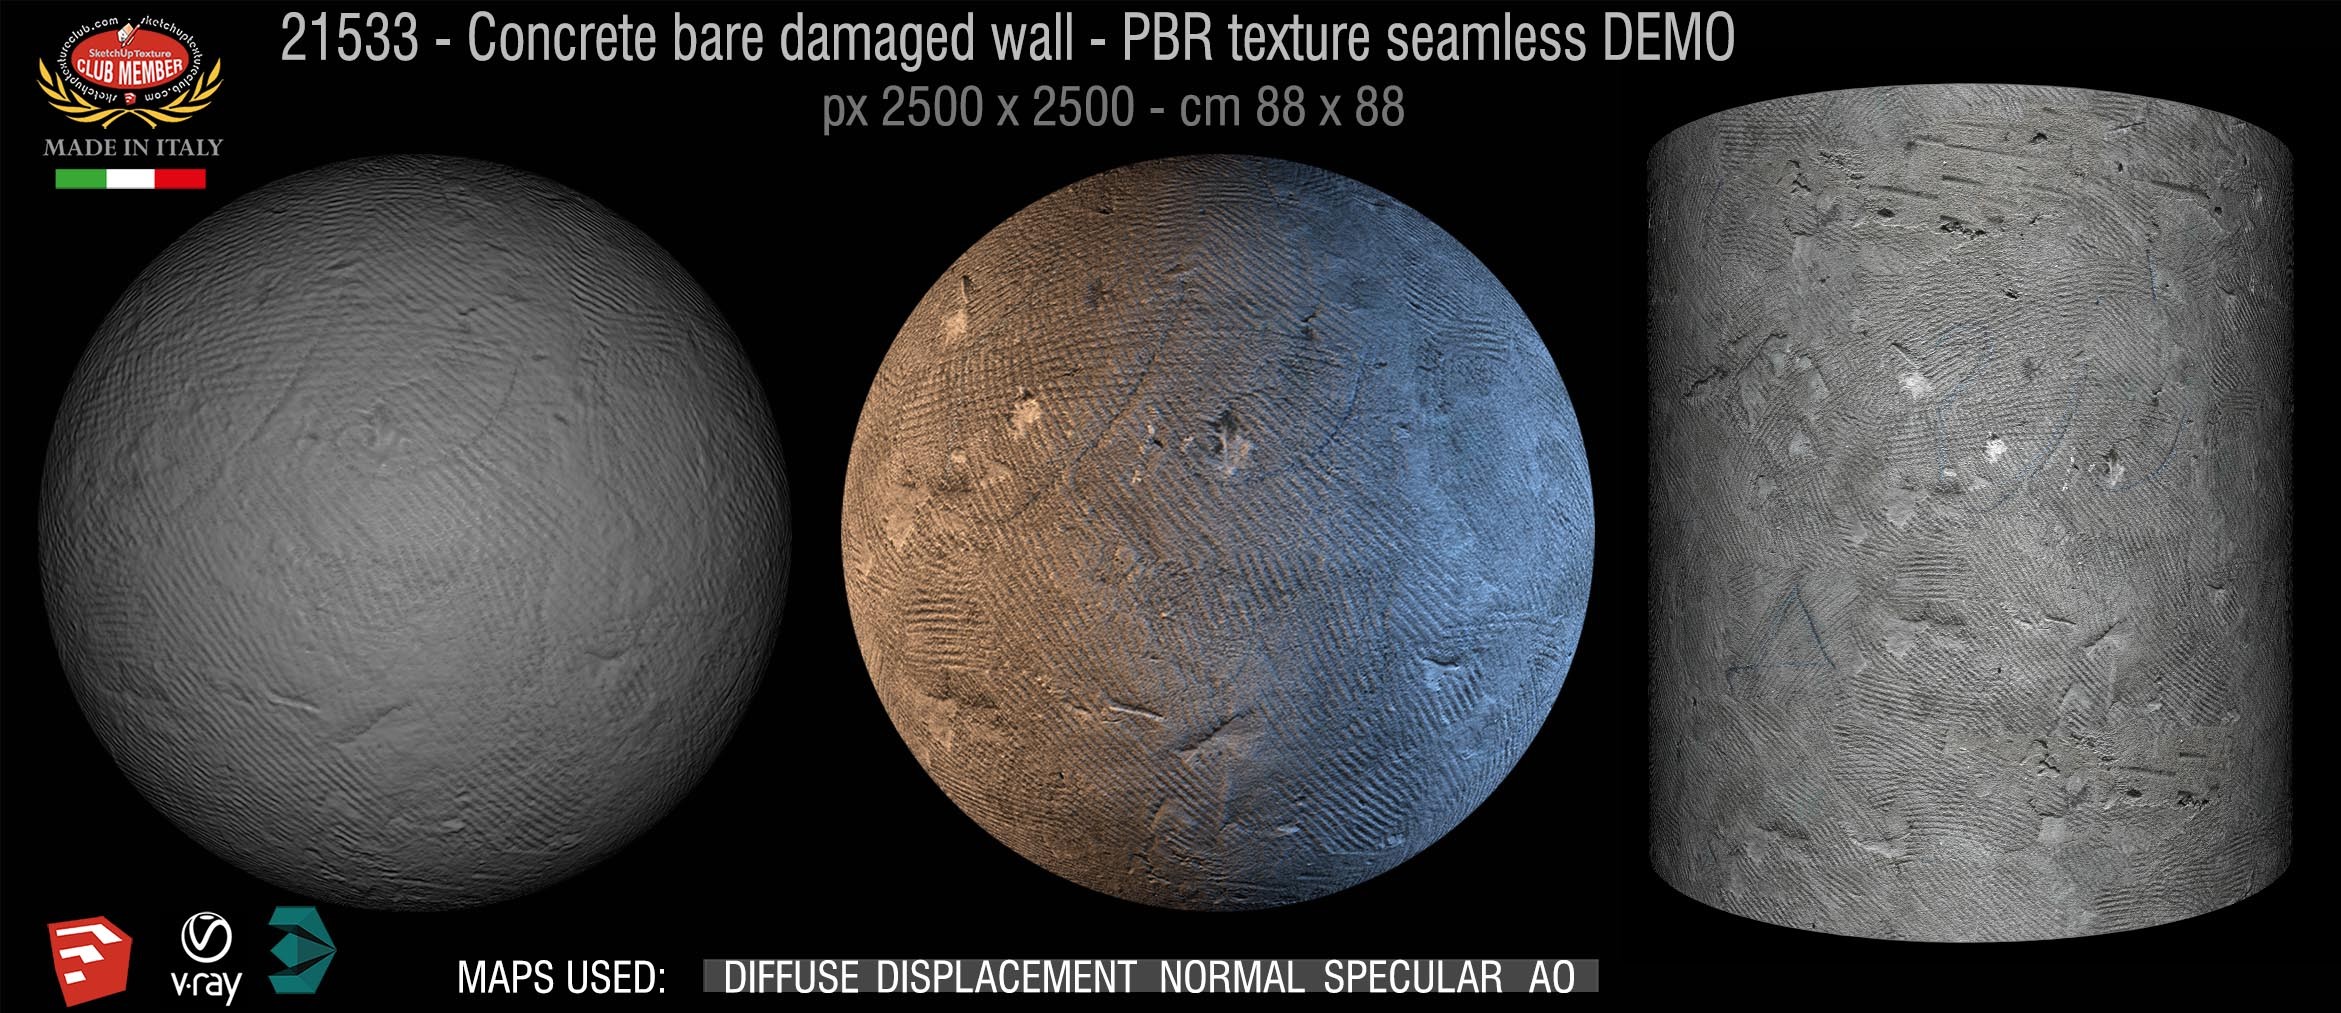 21533 concrete bare damaged wall PBR texture seamless DEMO